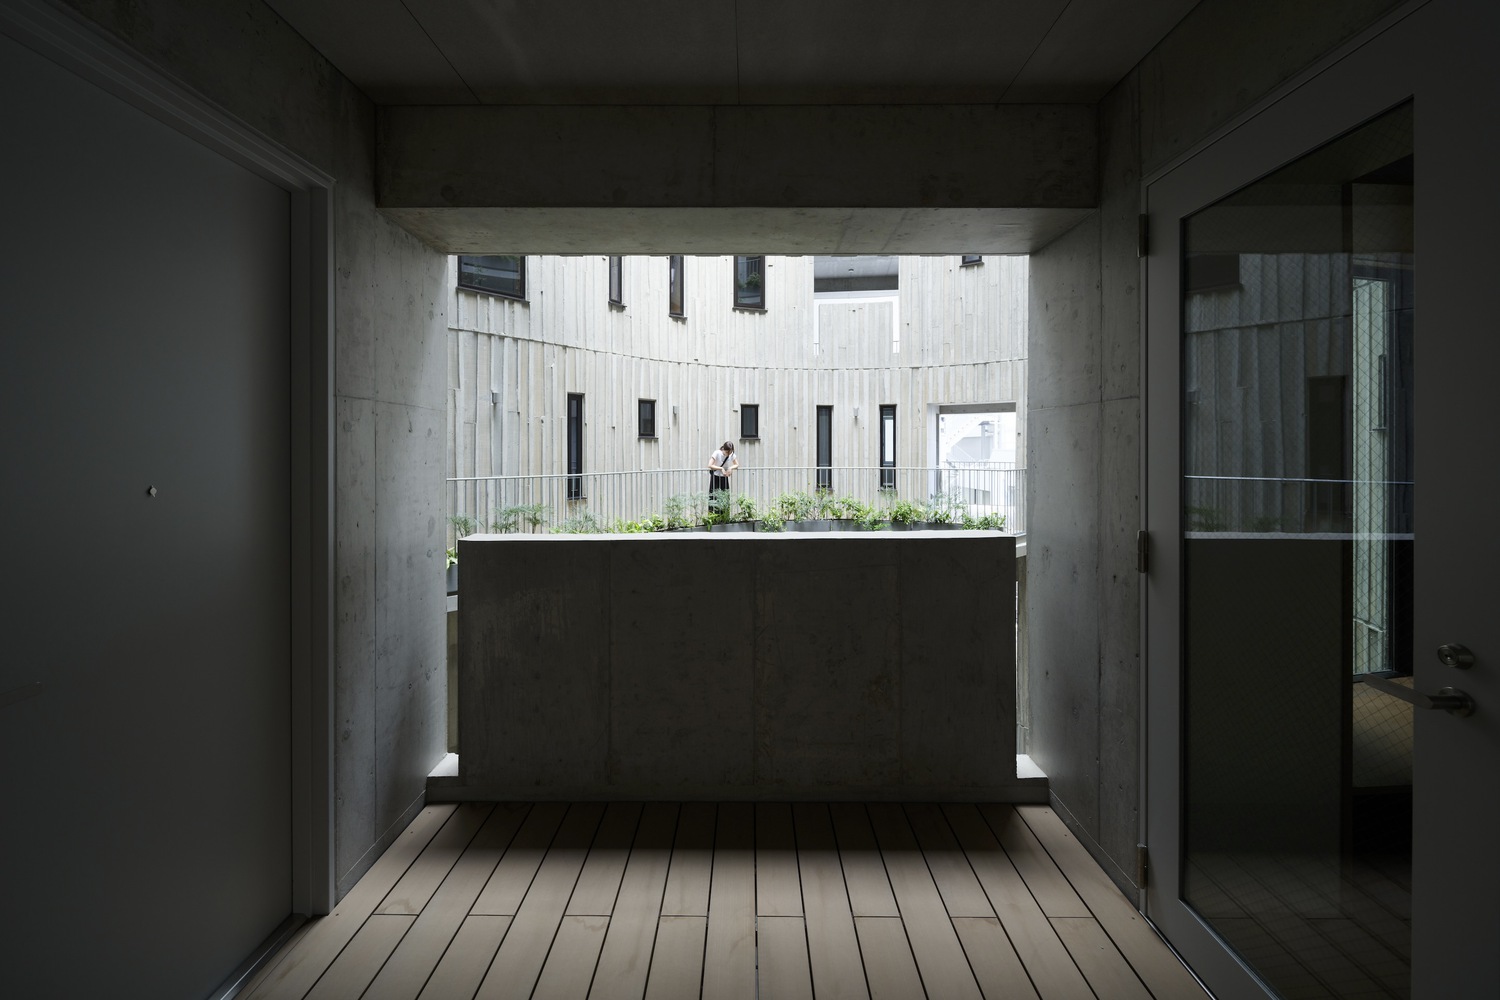 Terraces in the apartment complex that faces the courtyard. Photo by Masao Nishikawa.